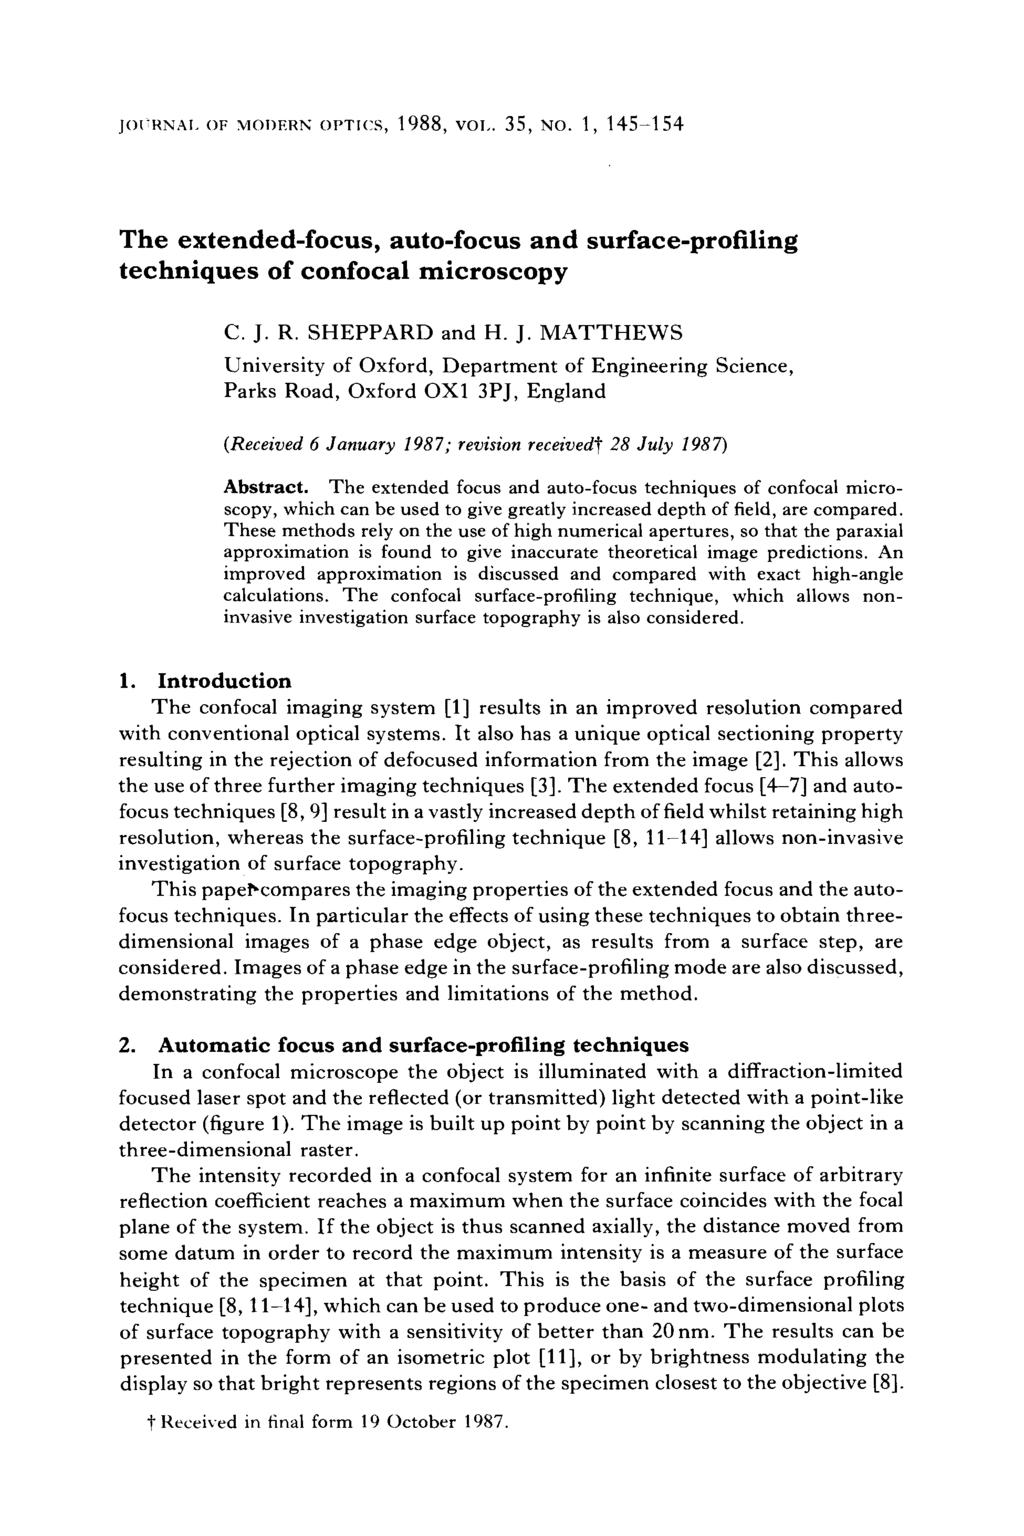 JOURNAL OF MODERN OPTICS, 1988, voi,. 35, NO. 1, 145-154 The extended-focus, auto-focus and surface-profiling techniques of confocal microscopy C. J.